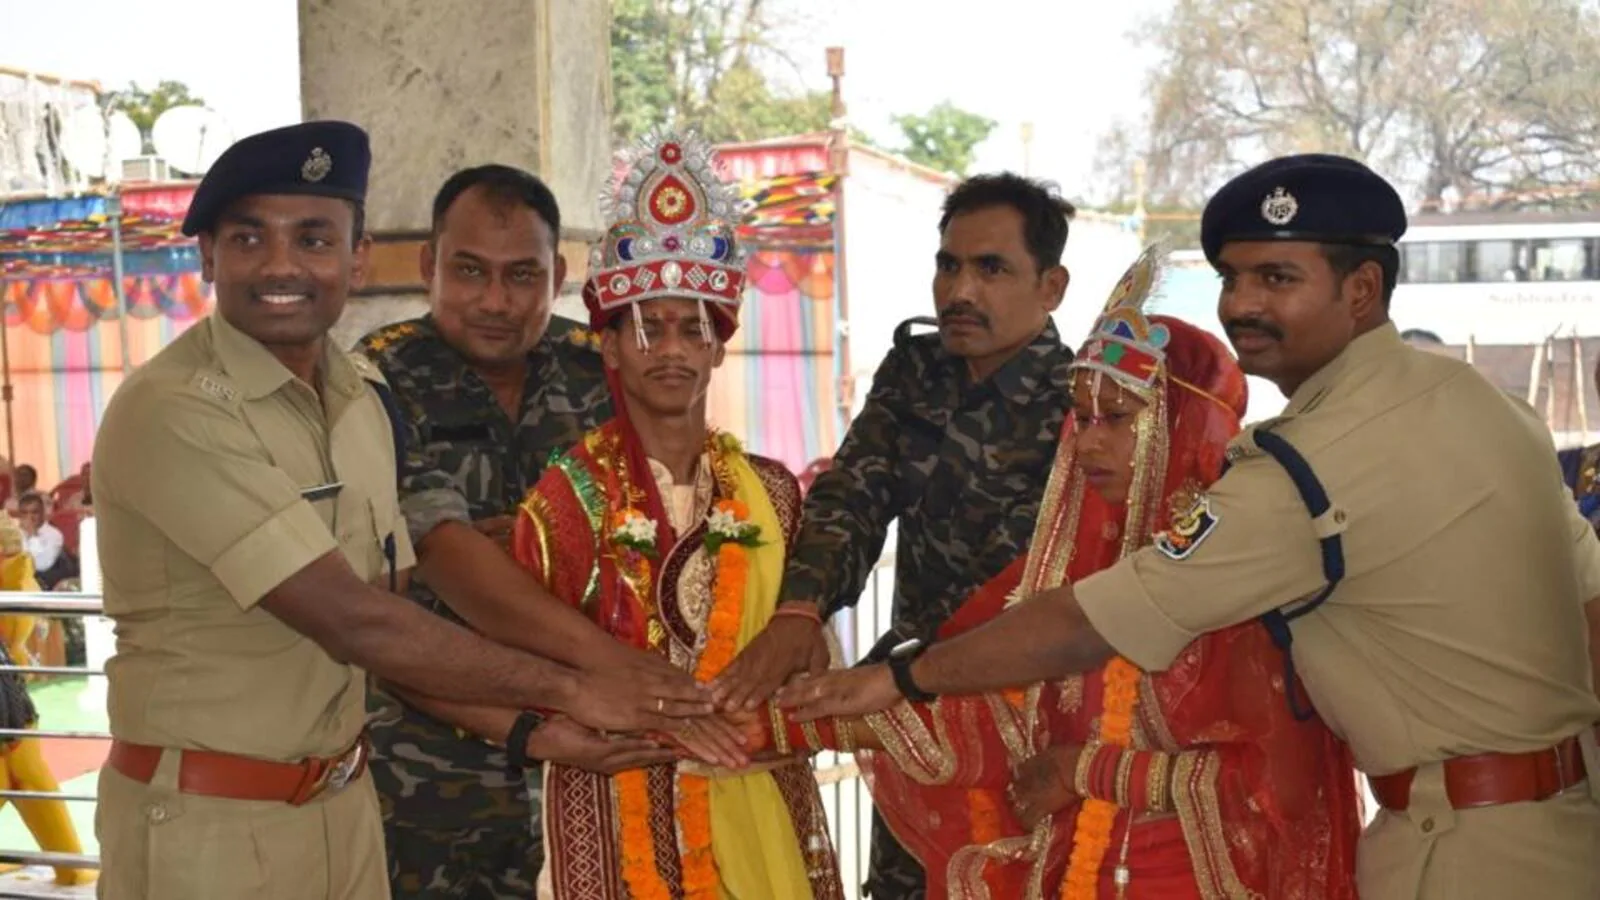 At Kalahandi’s police campus, a rare wedding of two former Maoists